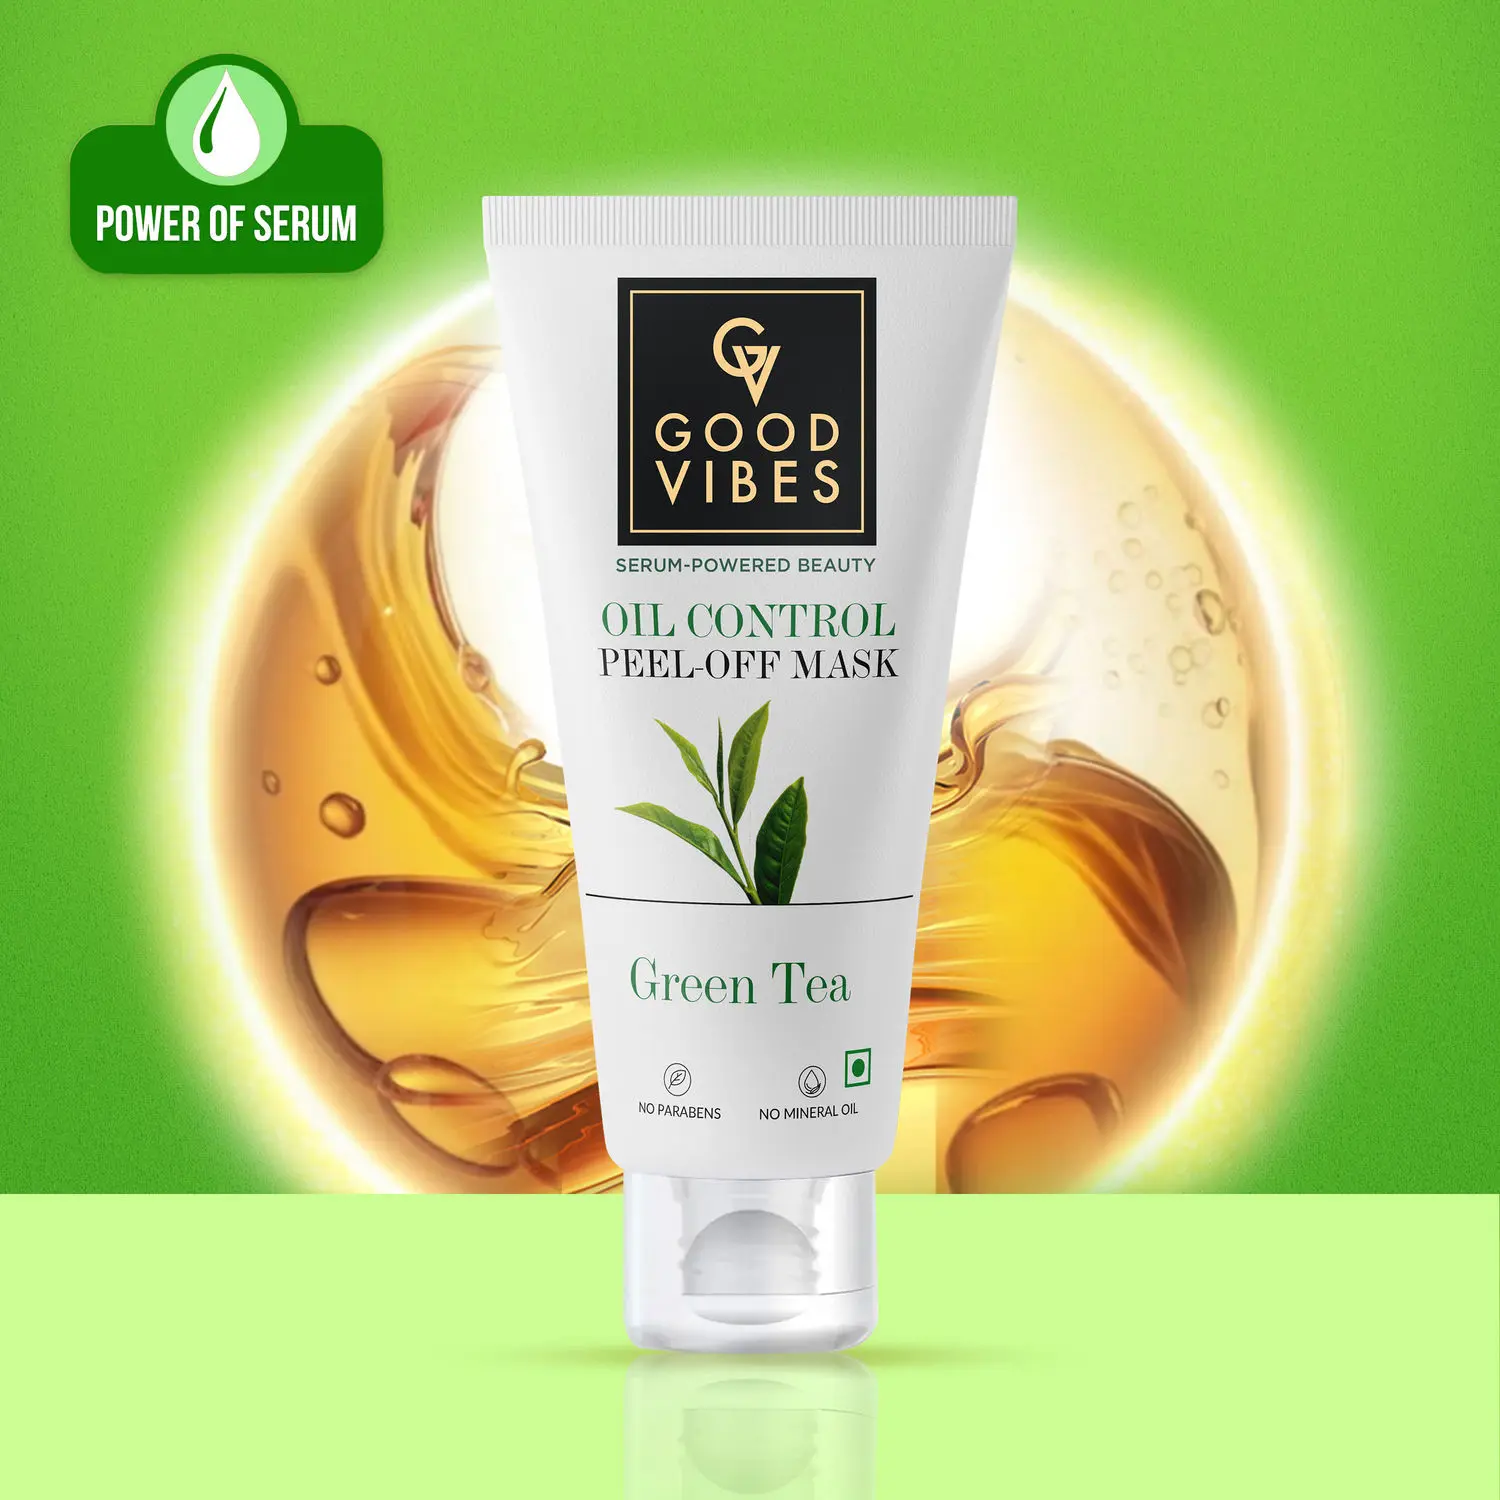 Good Vibes Oil Control Peel off Mask Green Tea with Power of Serum (50g)